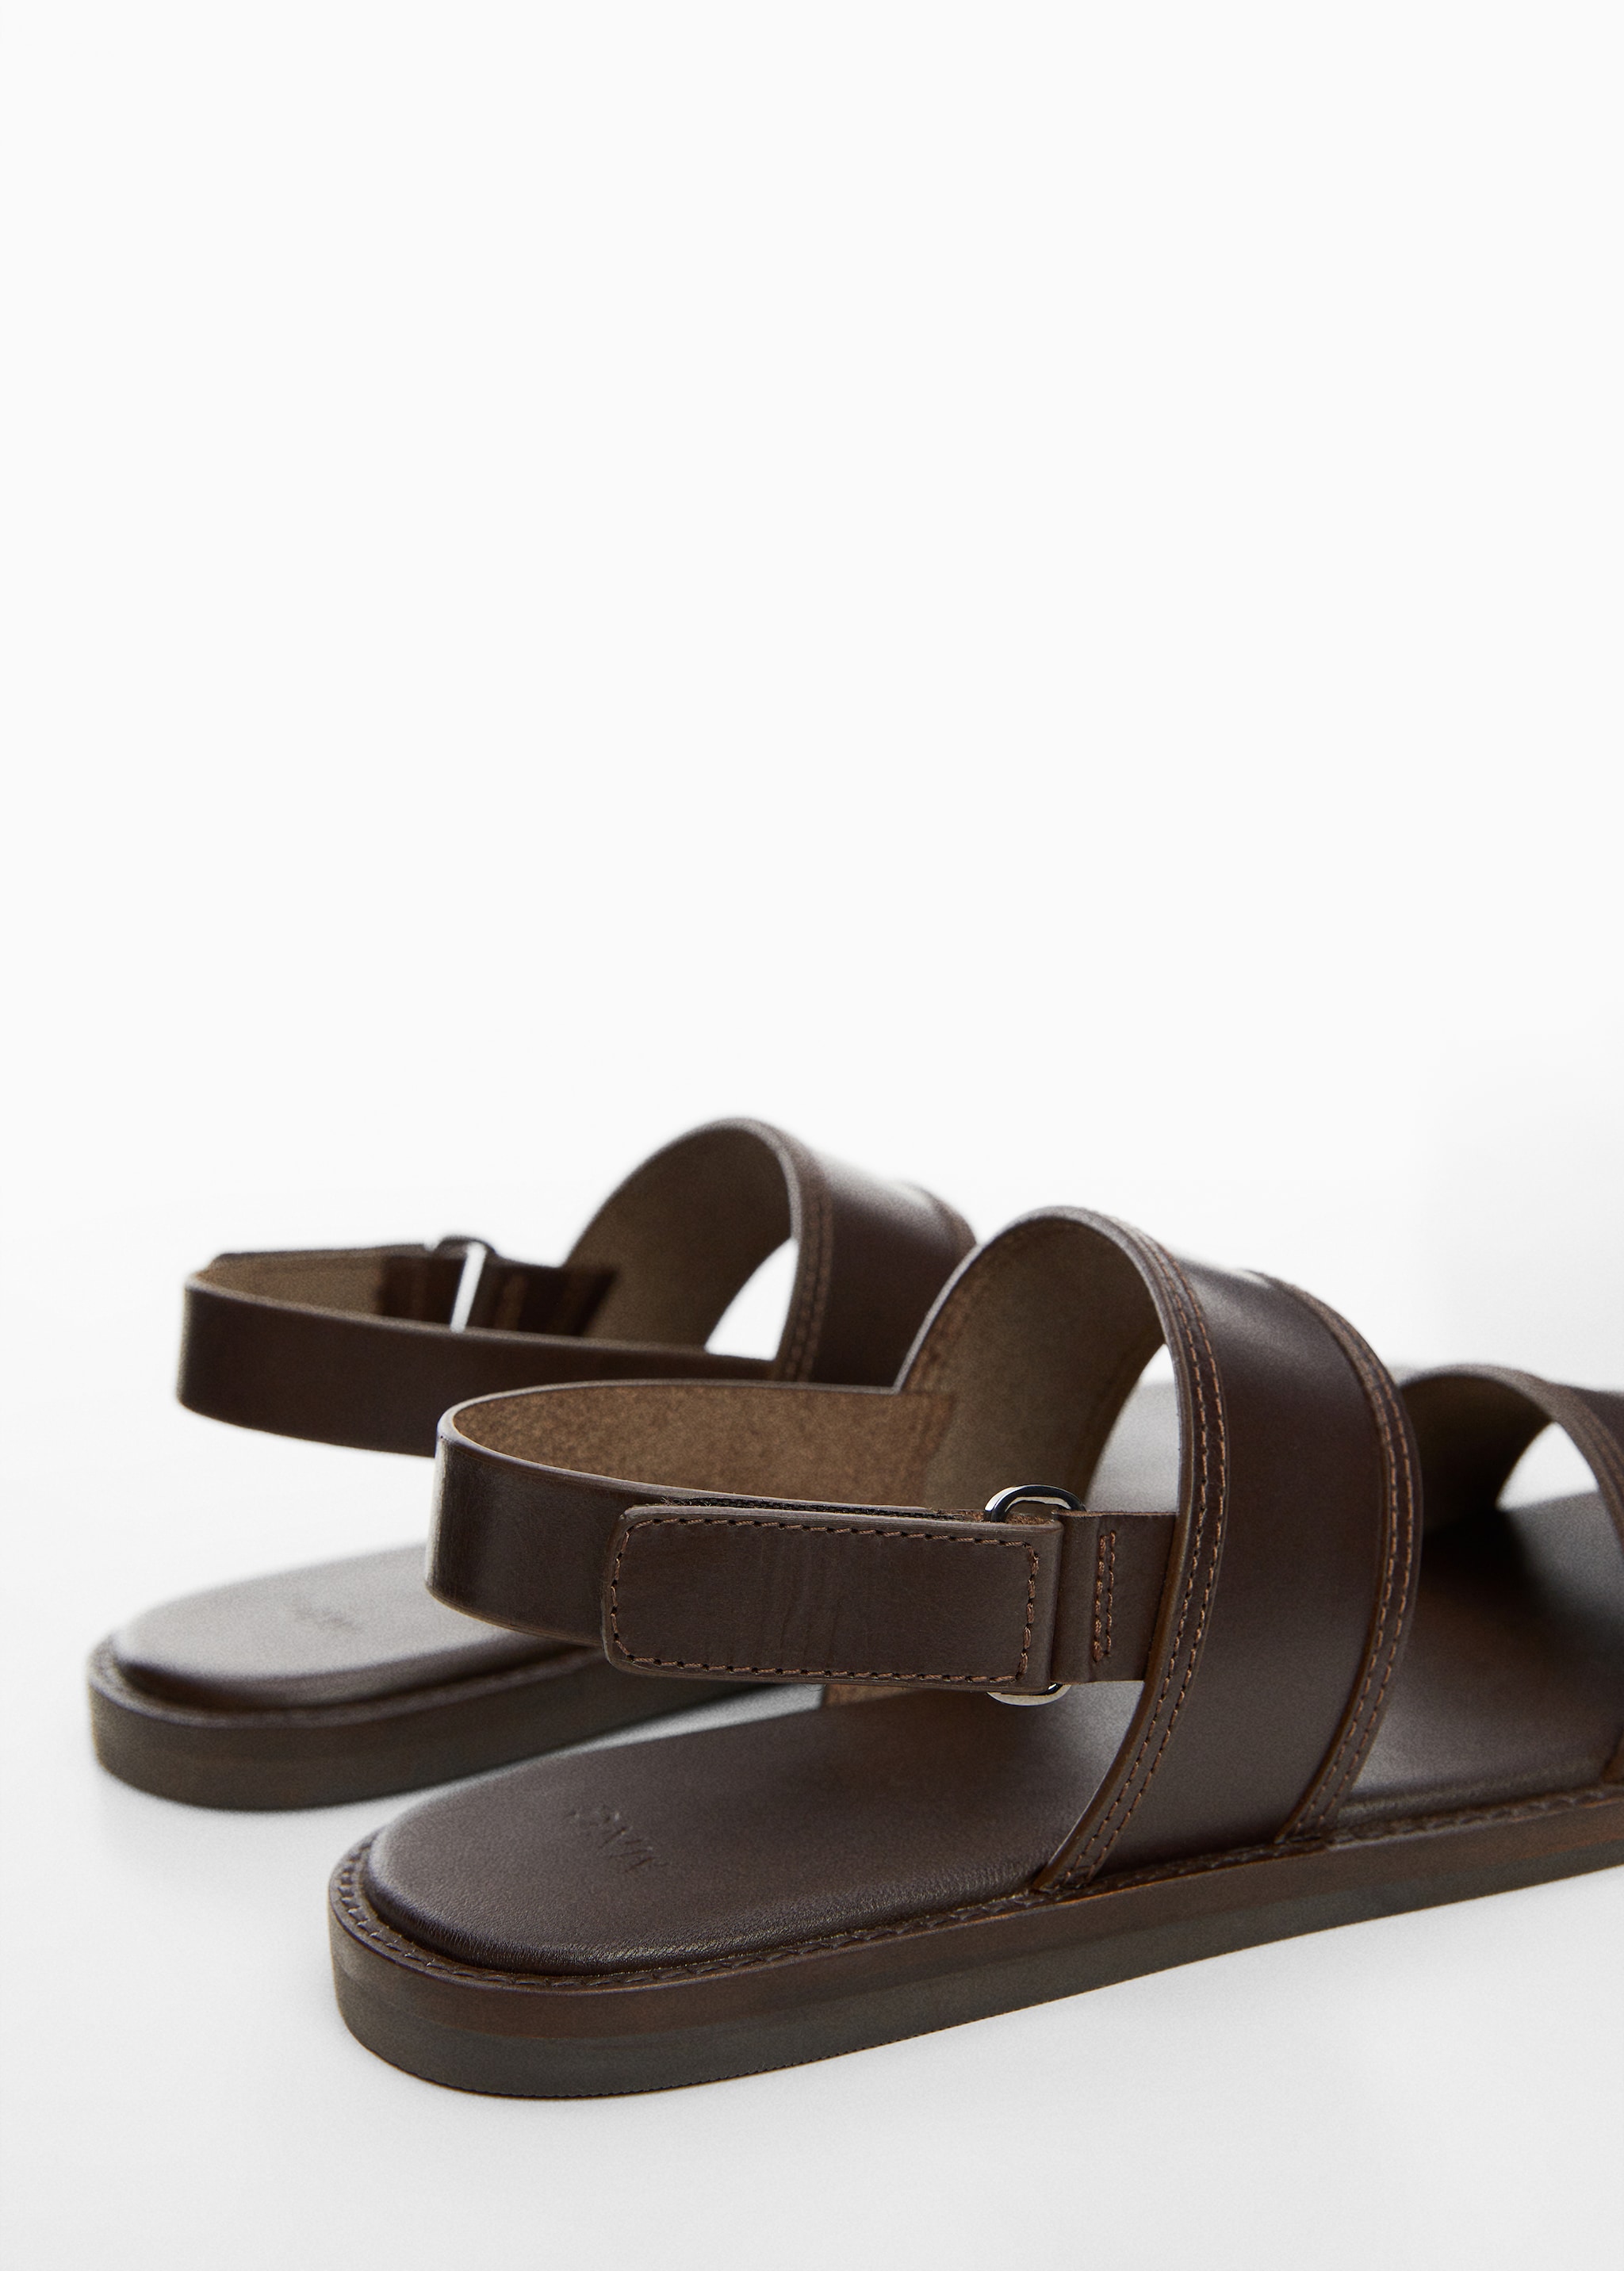 100% leather strap sandal - Details of the article 1